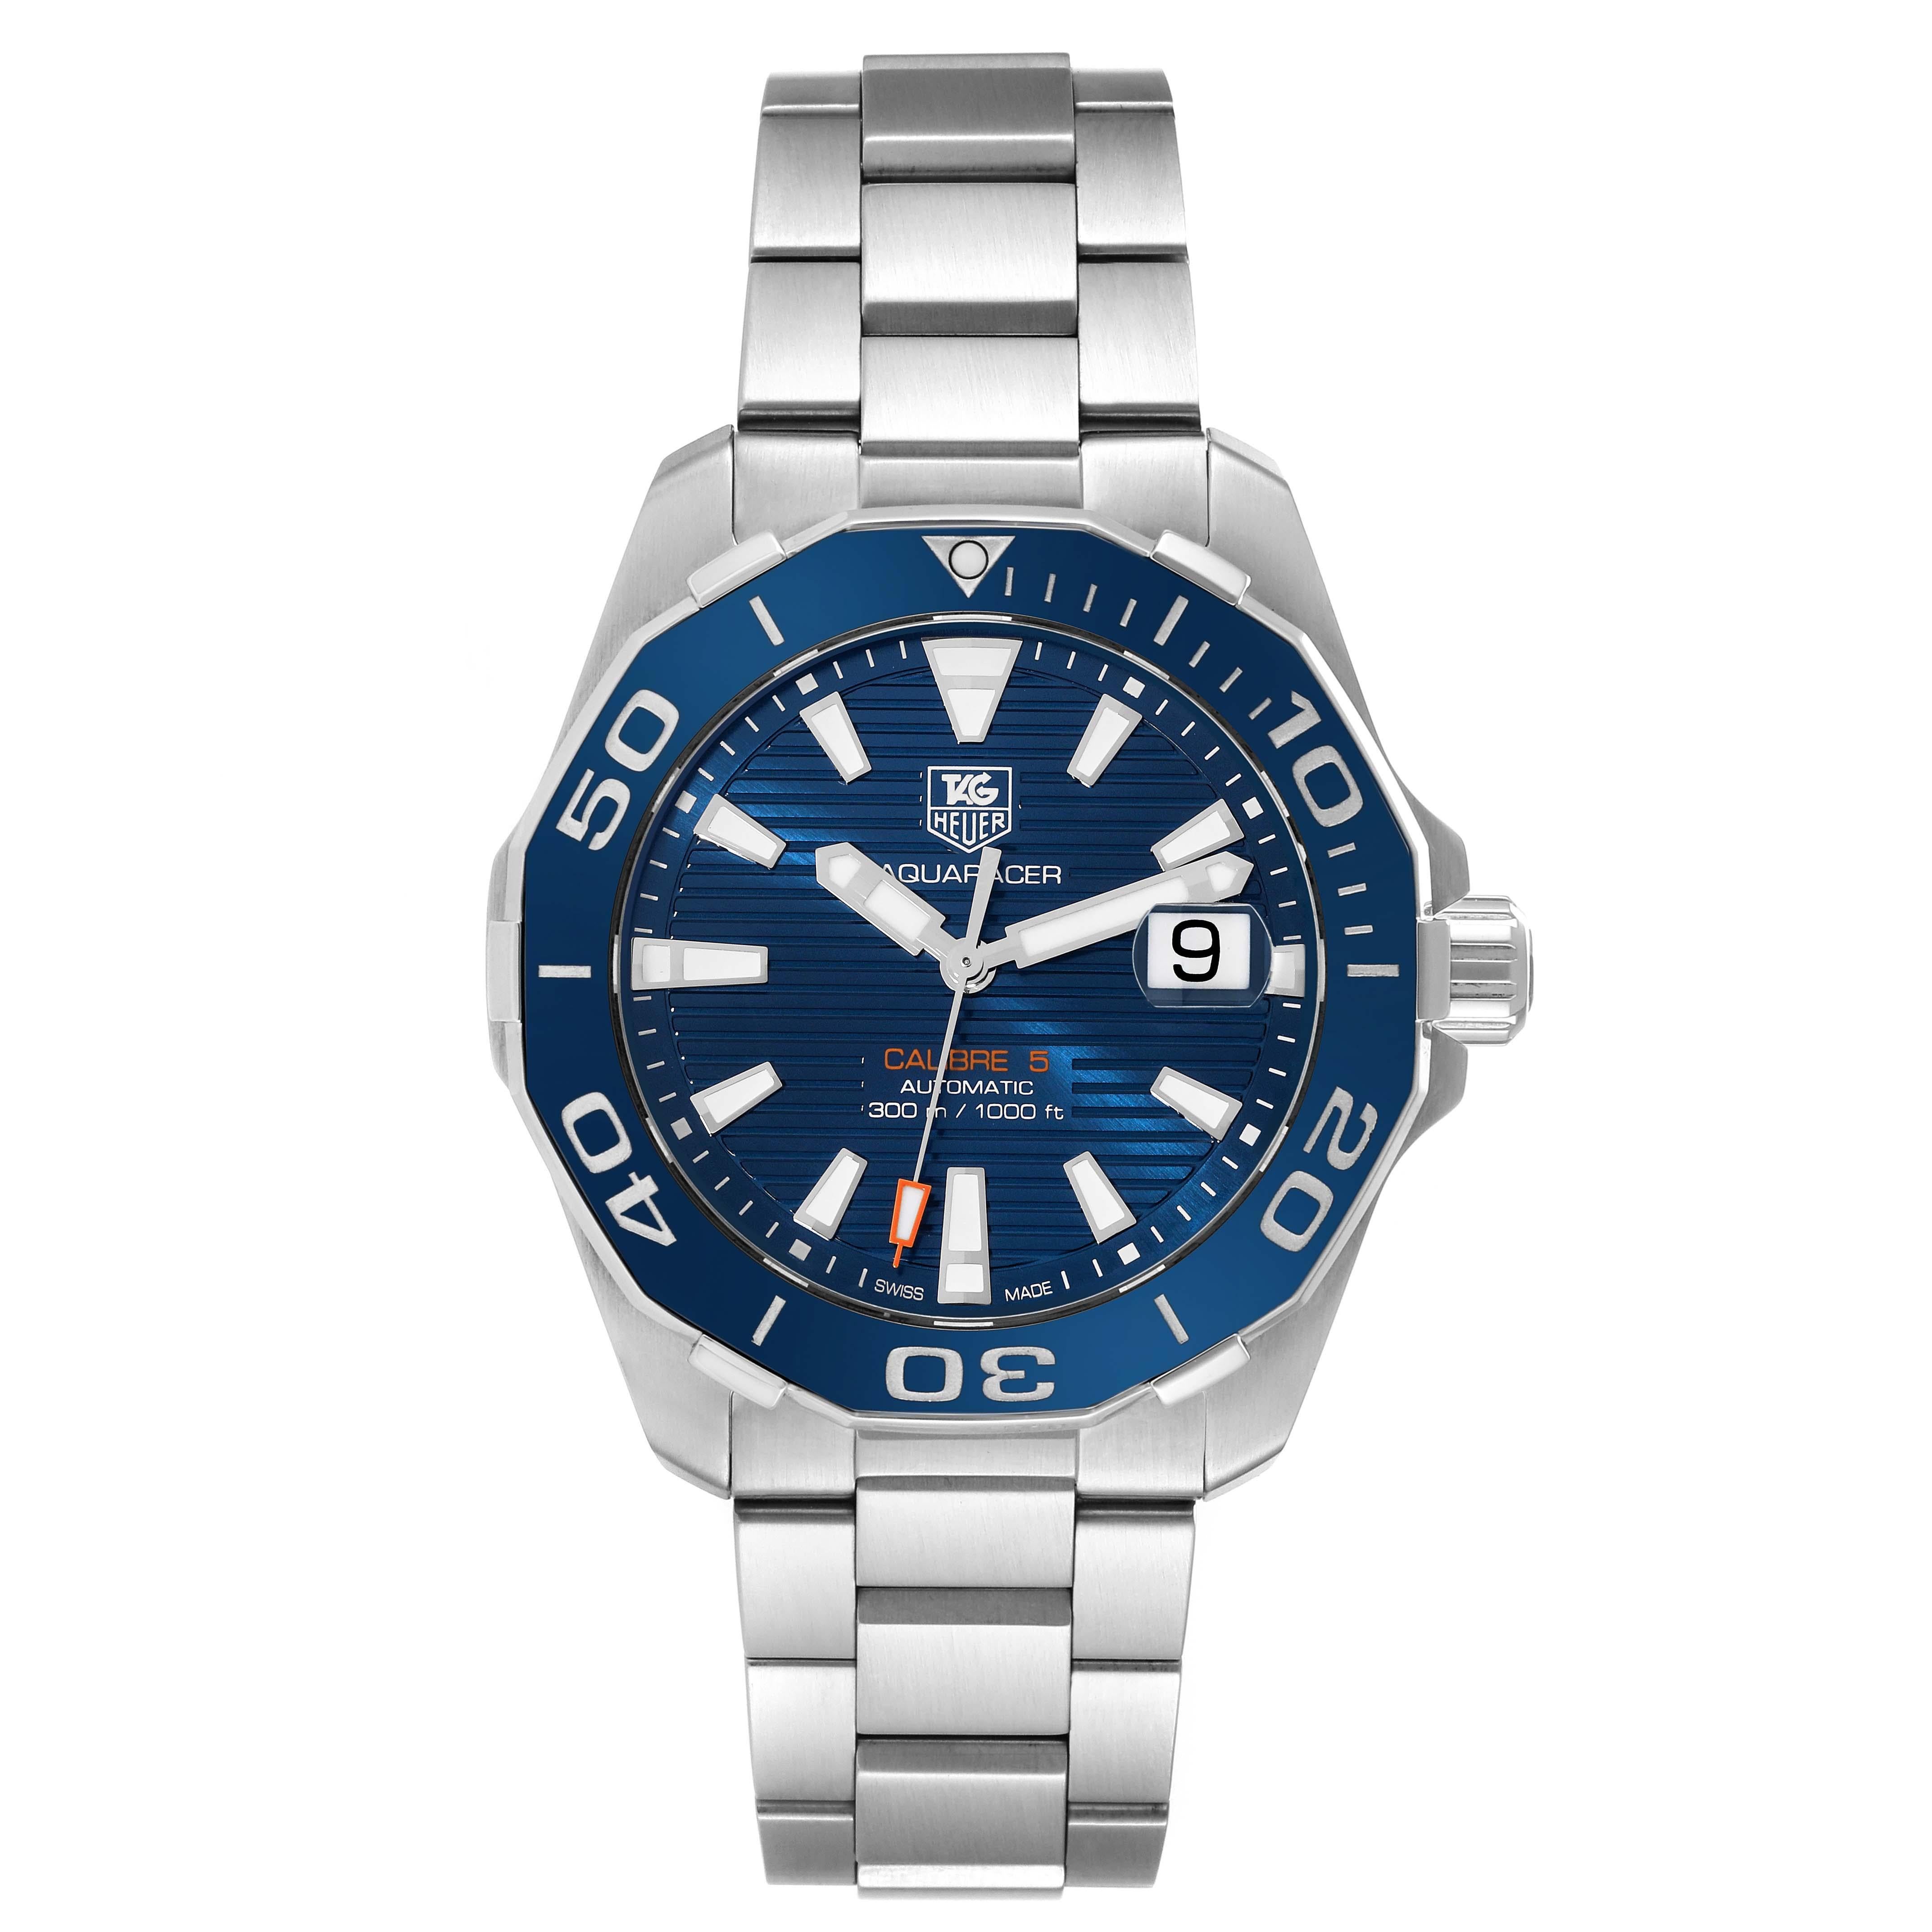 Tag Heuer Aquaracer Blue Dial Automatic Steel Mens Watch WAY211C Box Card. Automatic self-winding movement. Stainless steel case 41.0 mm in diameter. Blue unidirectional rotating bezel. Scratch resistant sapphire crystal. Blue dial with luminous